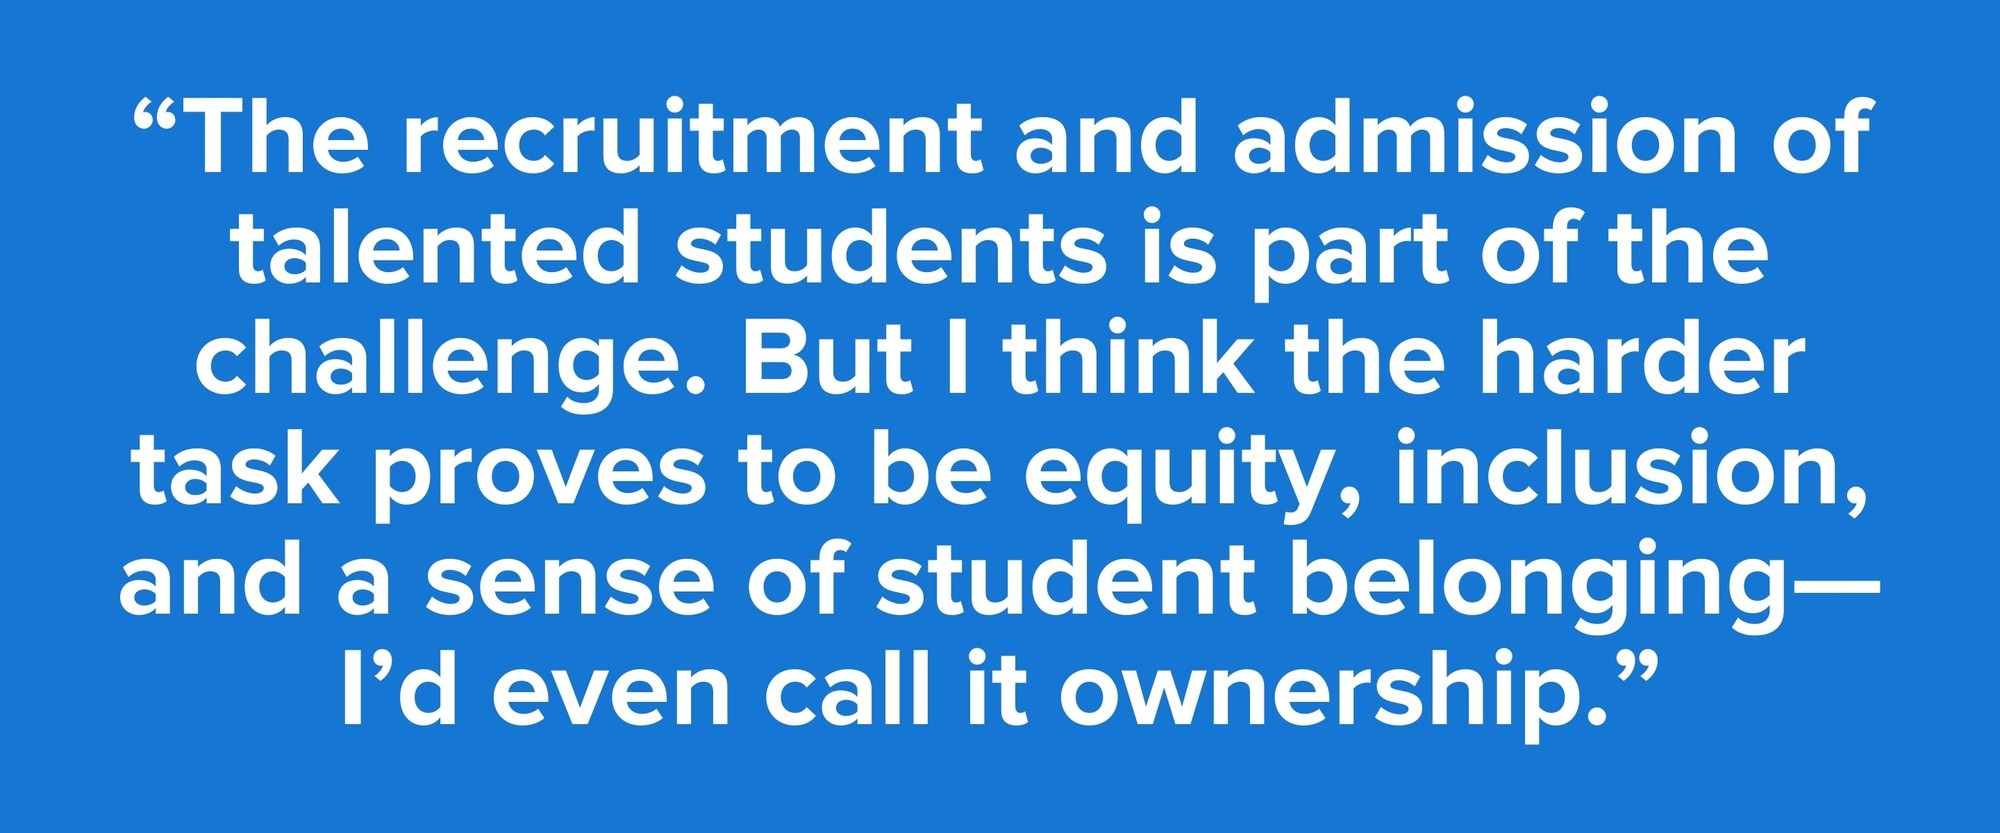 “The recruitment and admission of talented students is part of the challenge. But I think the harder task proves to be equity, inclusion, and a sense of student belonging—I’d even call it ownership.”